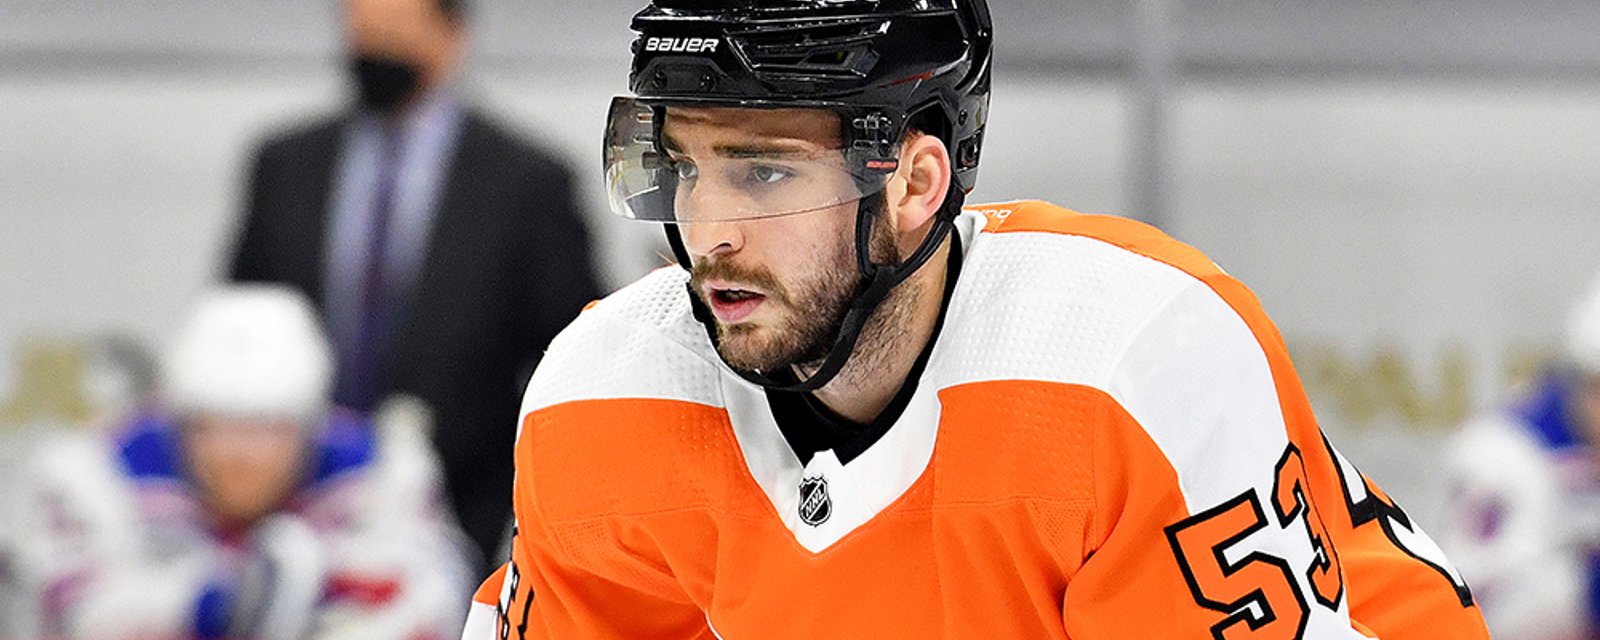 Shayne Gostisbehere believes he answered the bell in face of adversity 